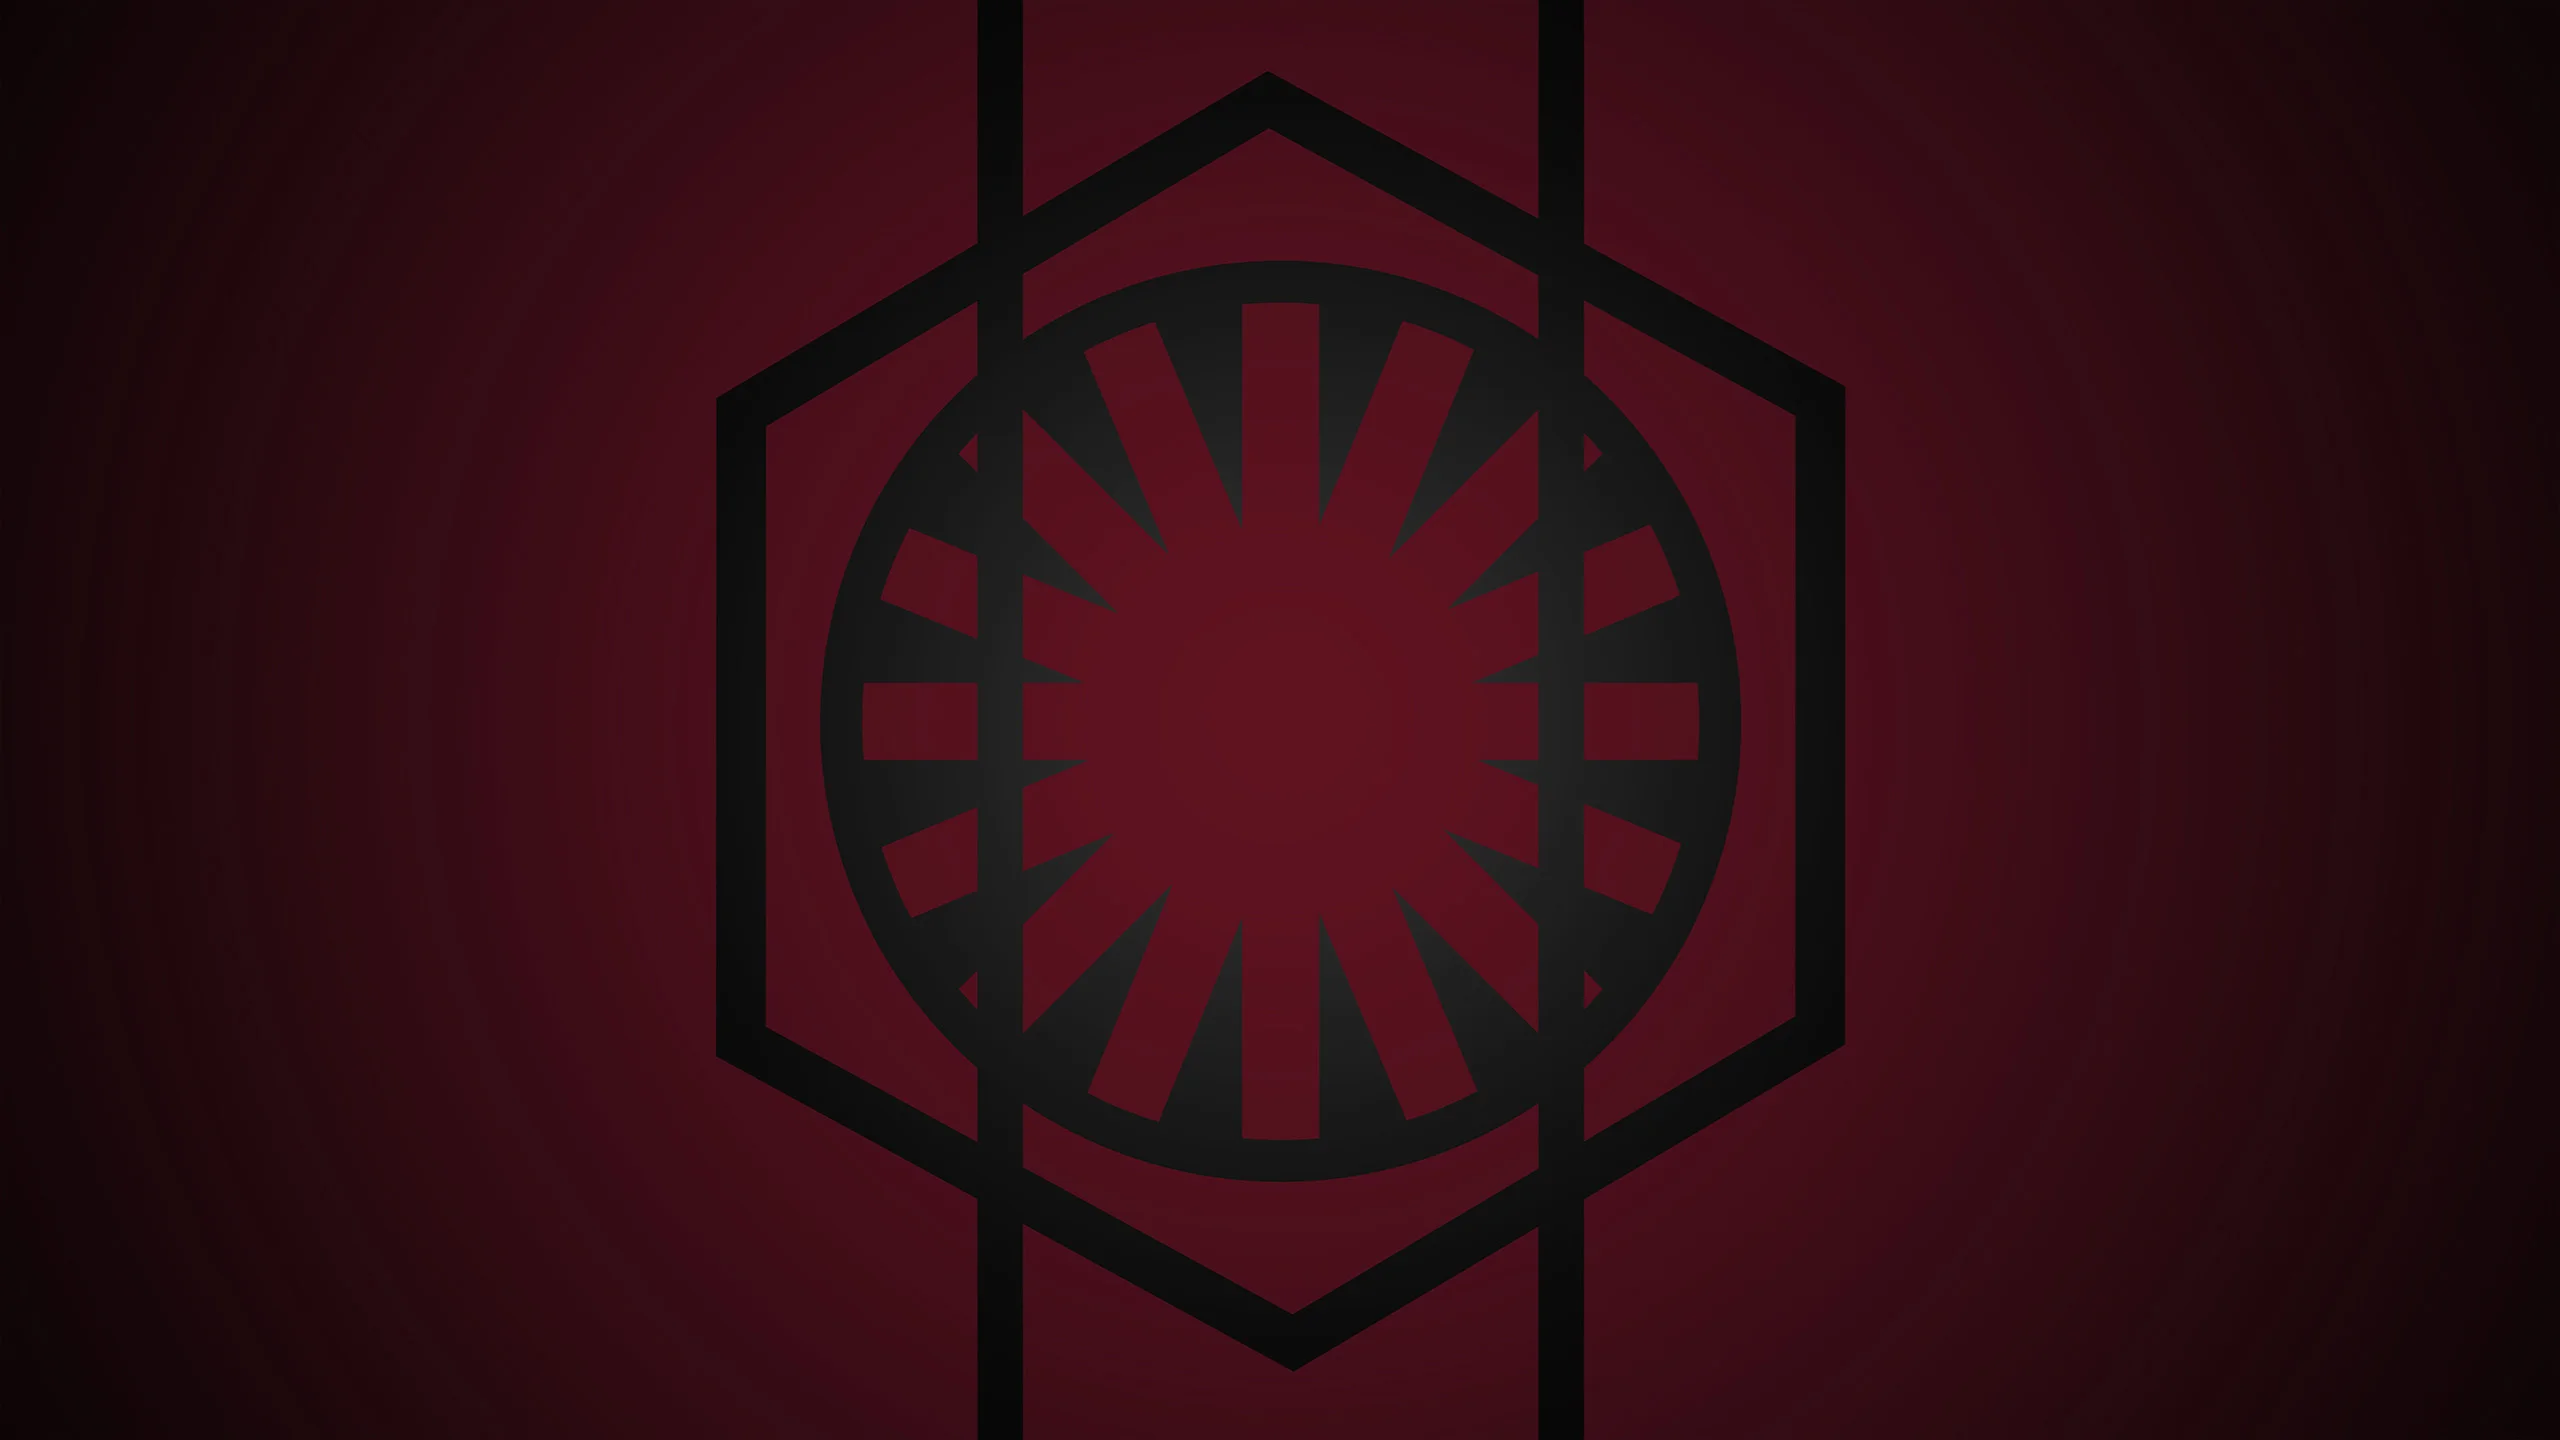 My first attempt at a new Empire wallpaper